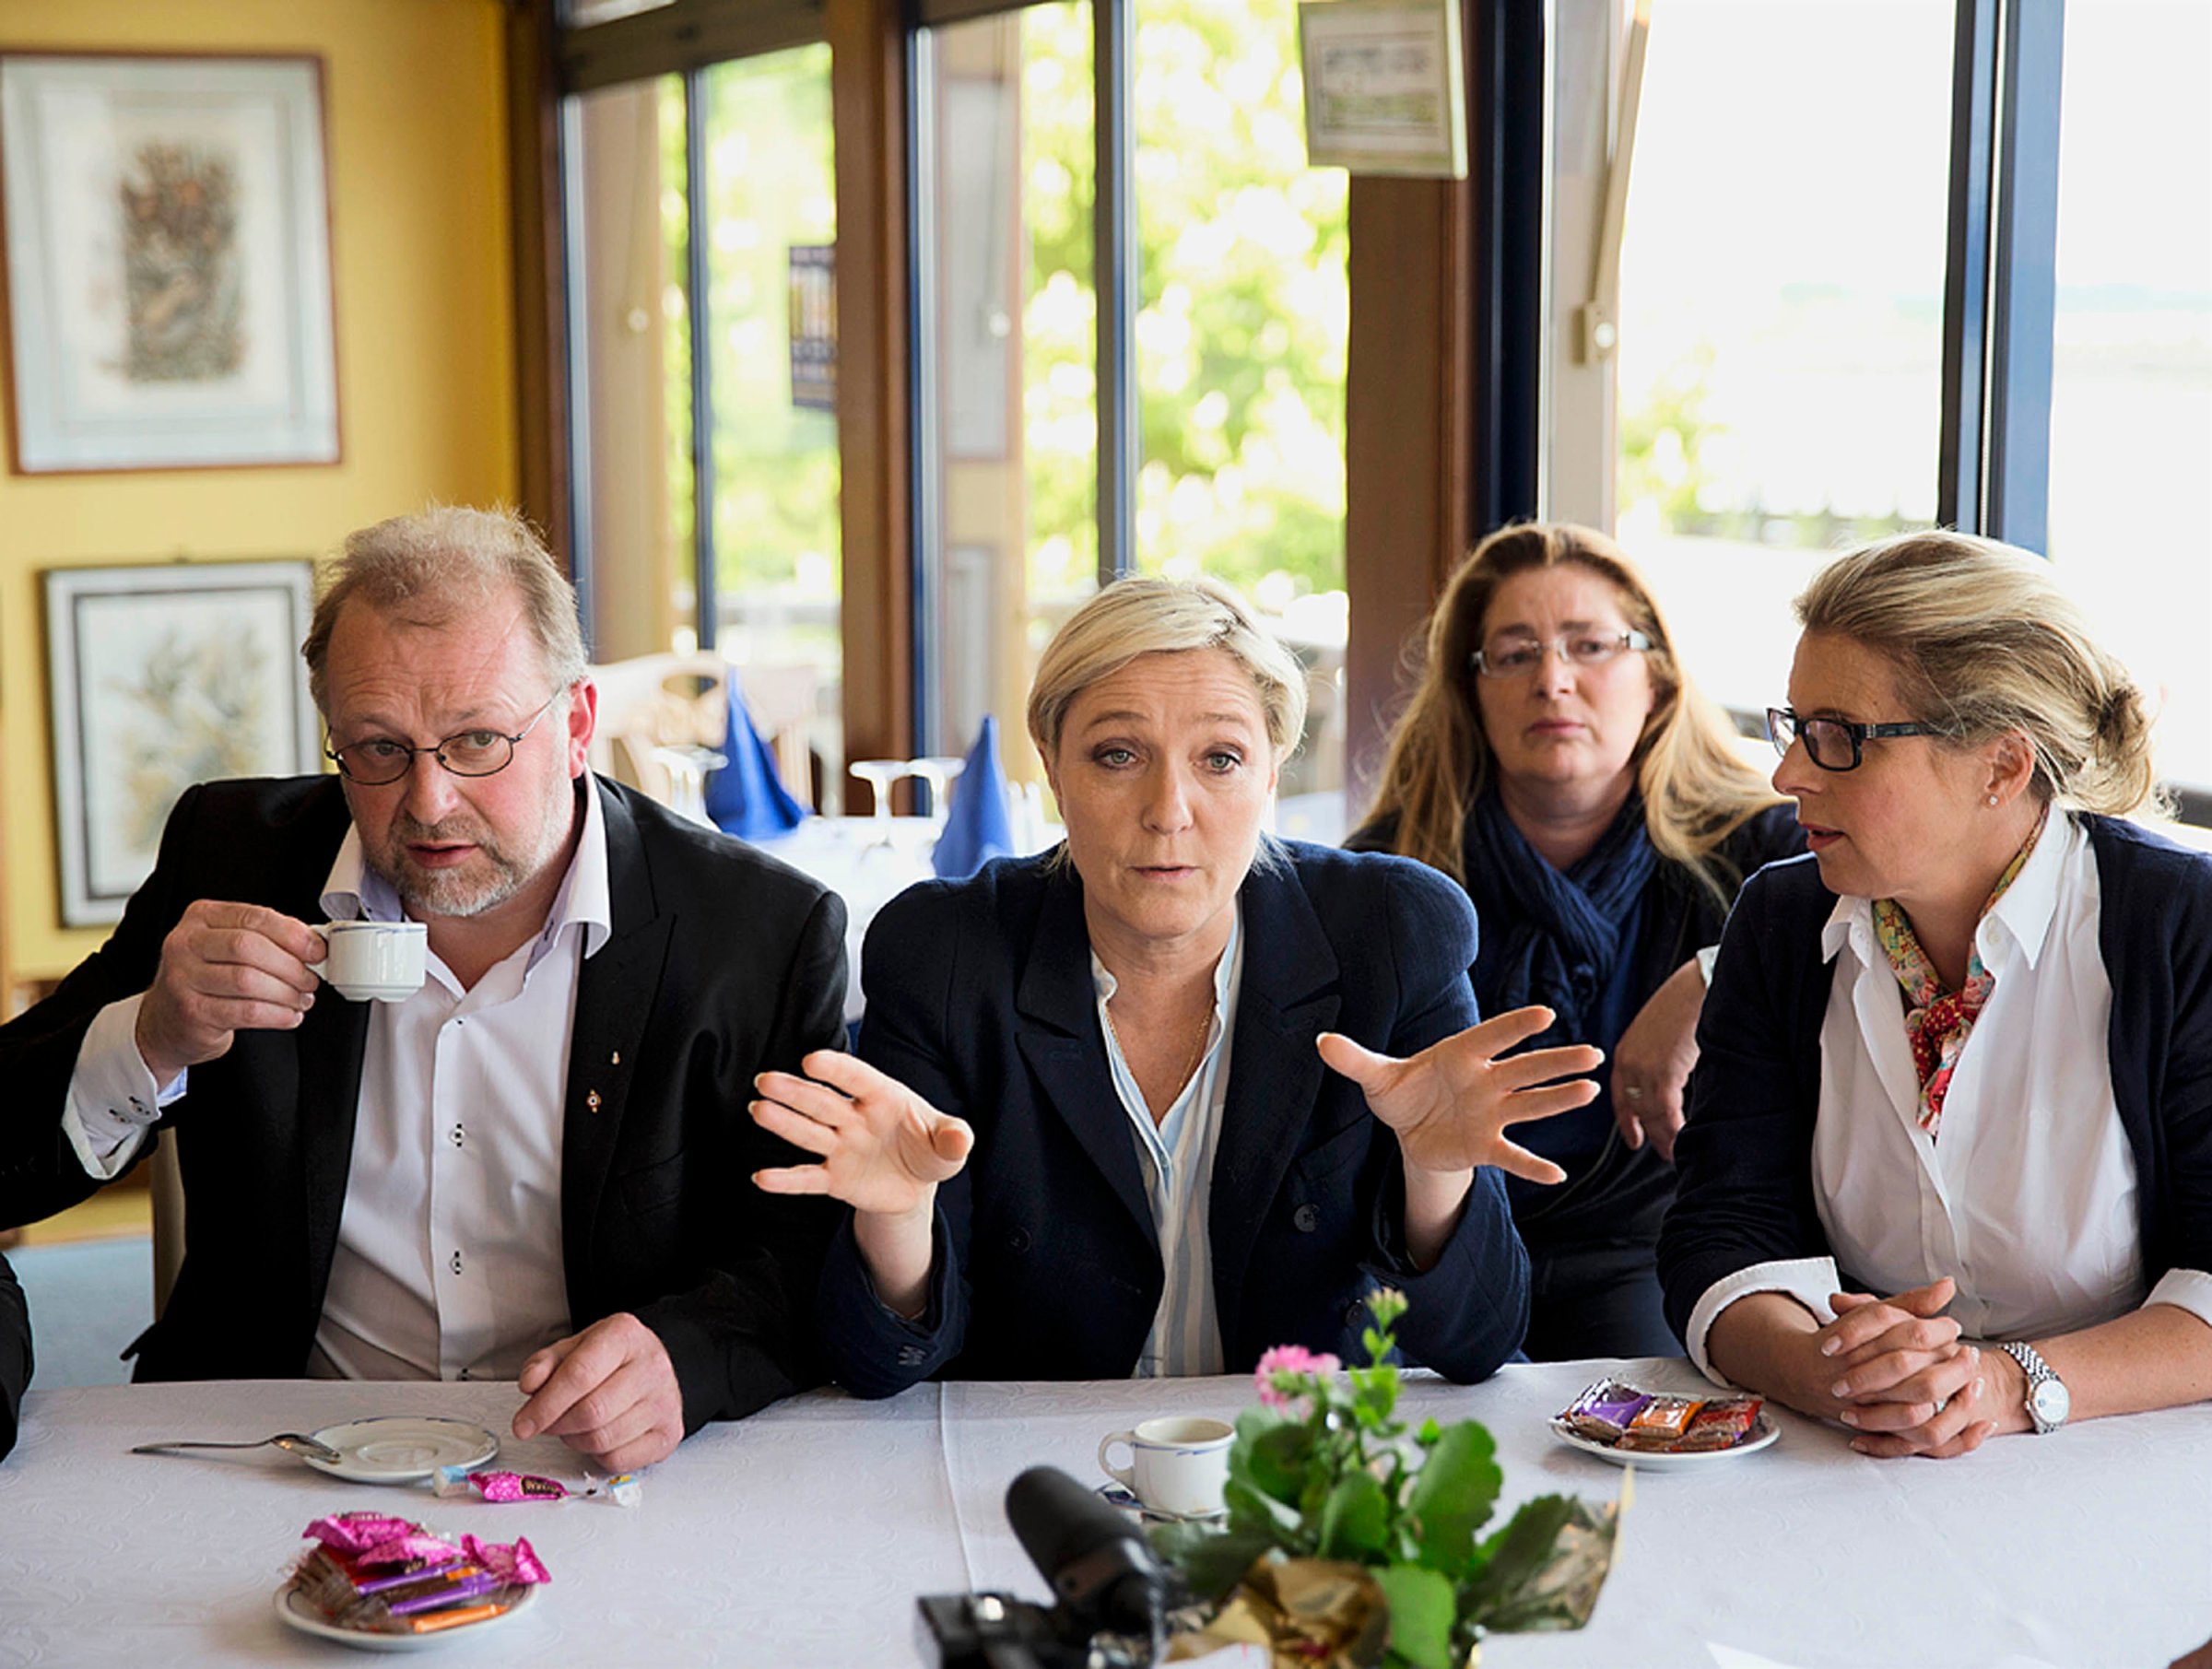 Marine Le Pen meets with the press after doing a walk through of the town of  Abbeville, France , April 28th, 2014.  Marine Le Pen is a French political leader, lawyer by profession, a French politician and the president of the far-right Front National, t